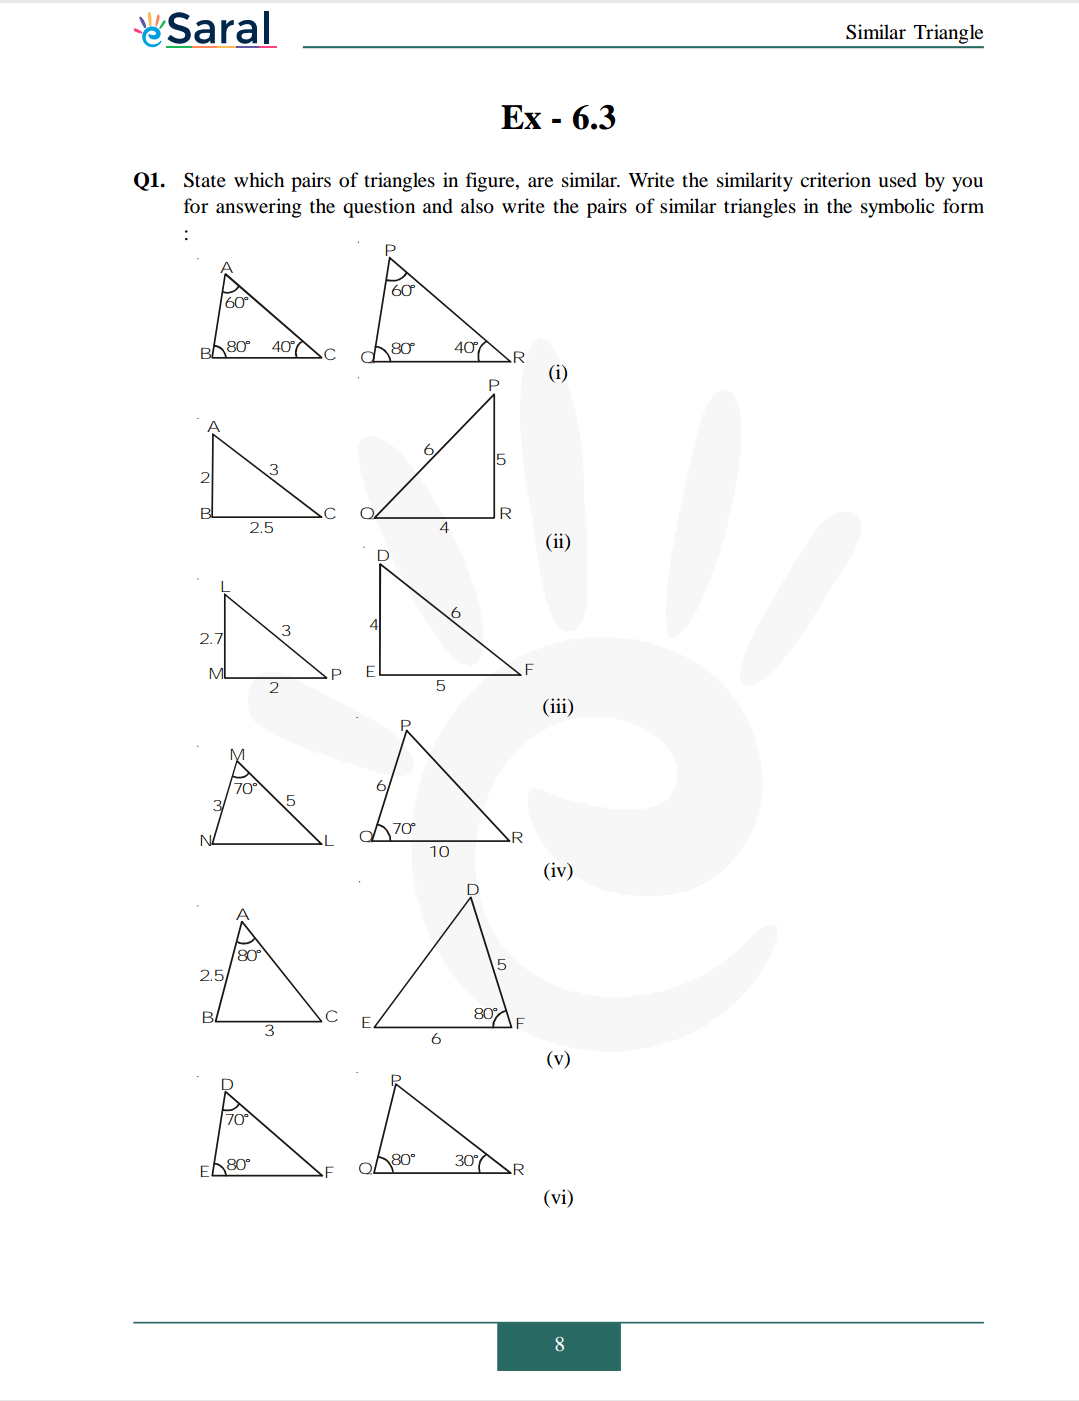 NCERT Solutions for Class 10 Maths chapter 6 Exercise 6.3 Image 1